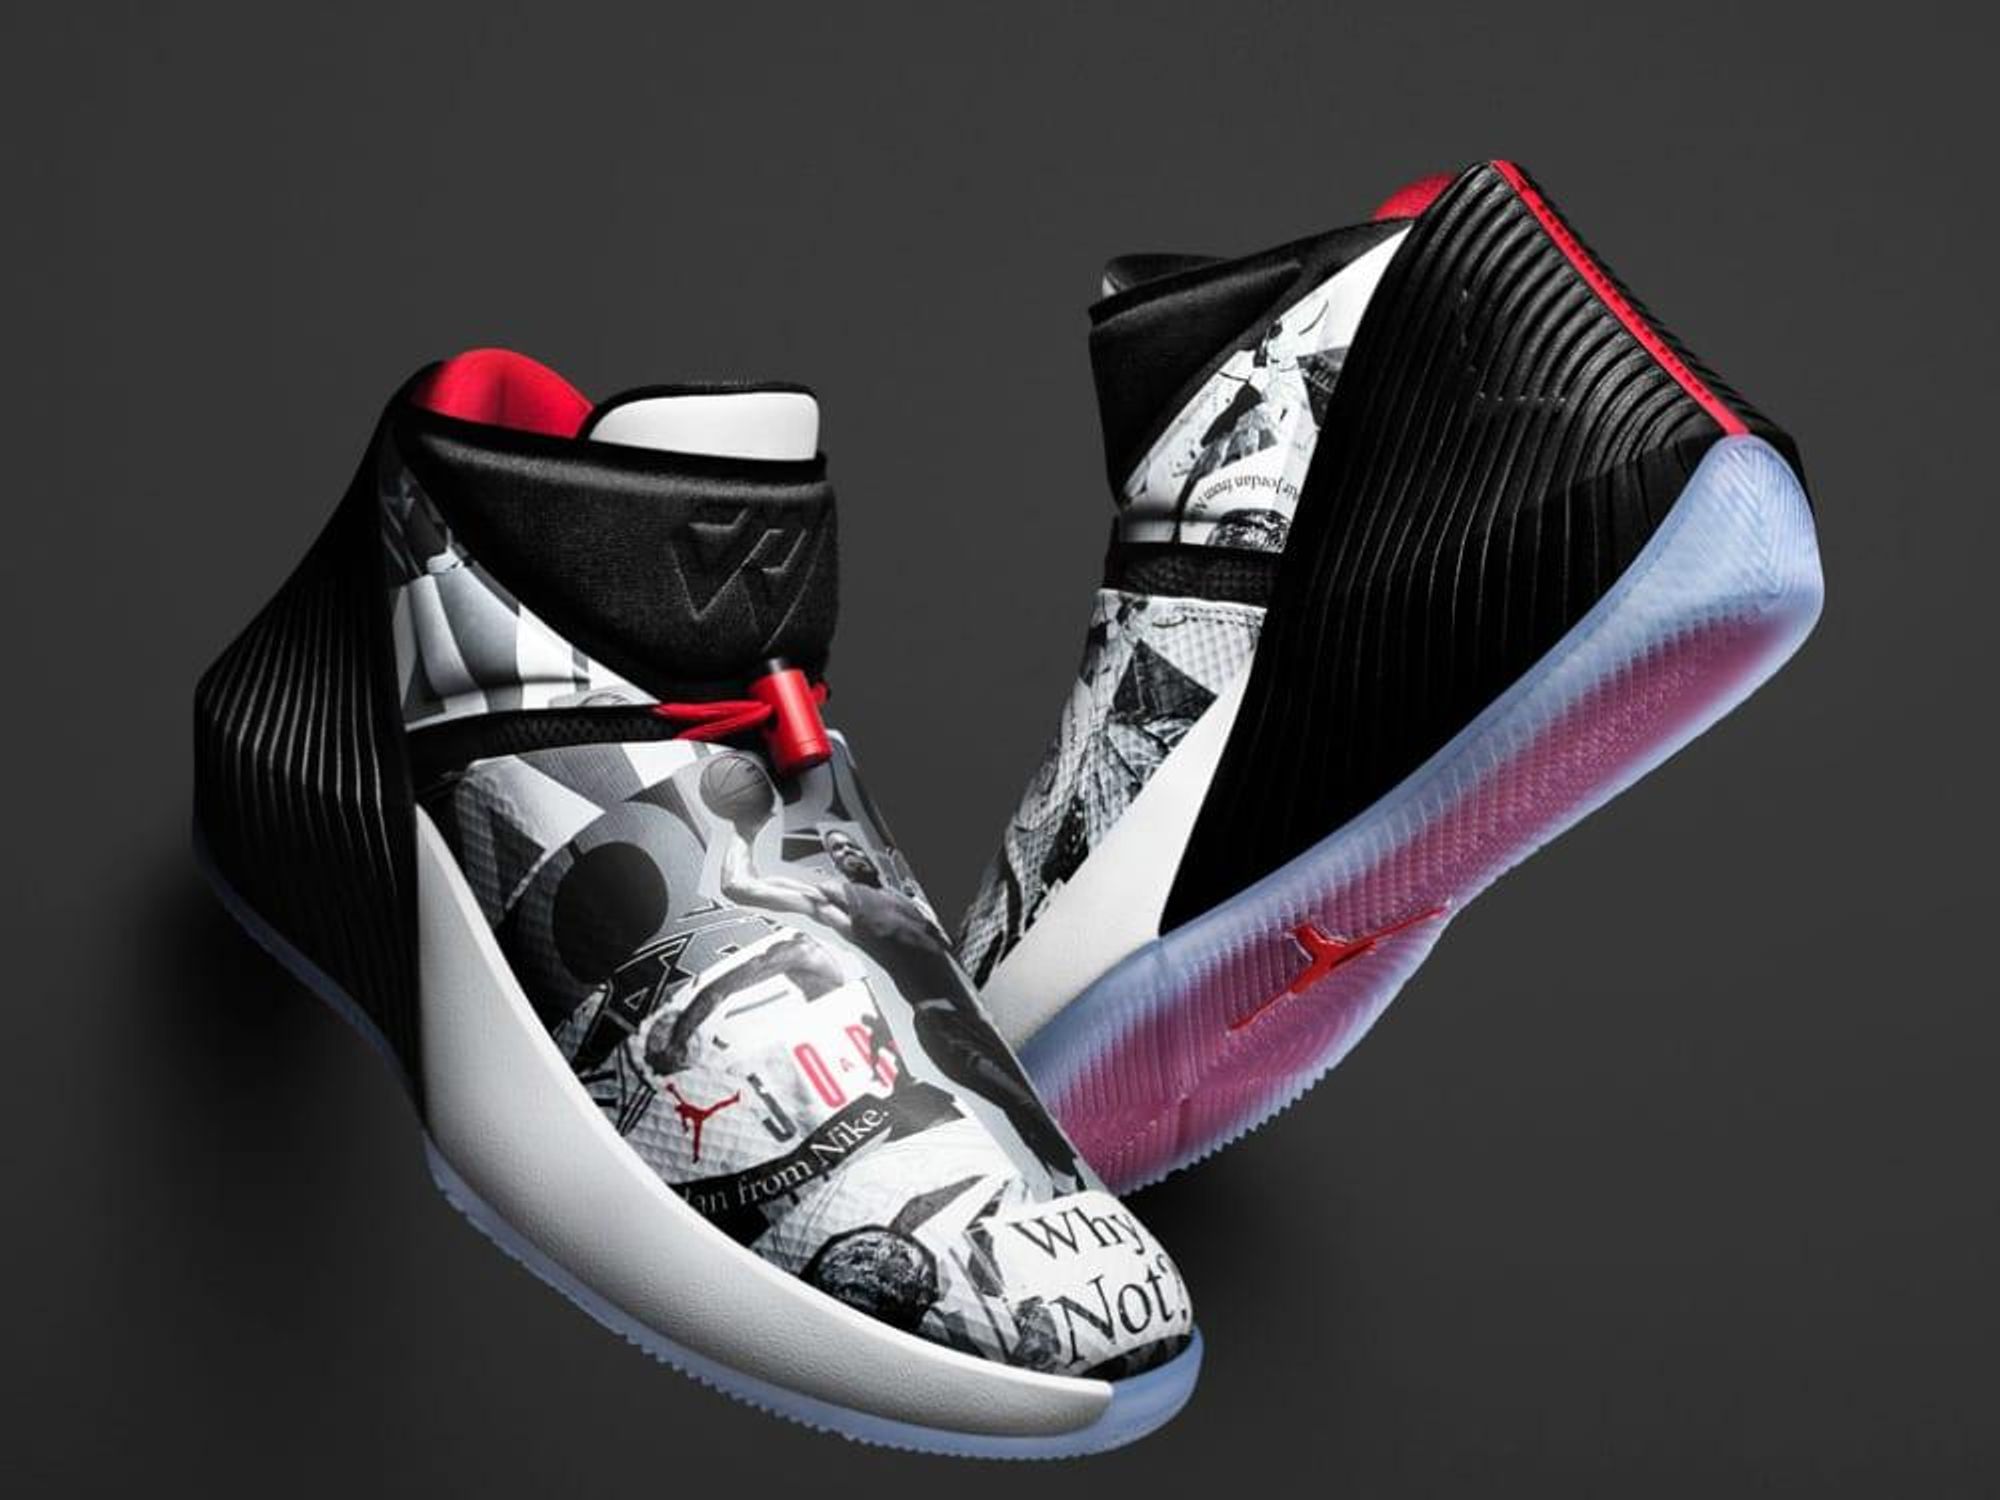 Russell Westbrook's Signature Air Jordan Sneakers Are as Bold as He Is